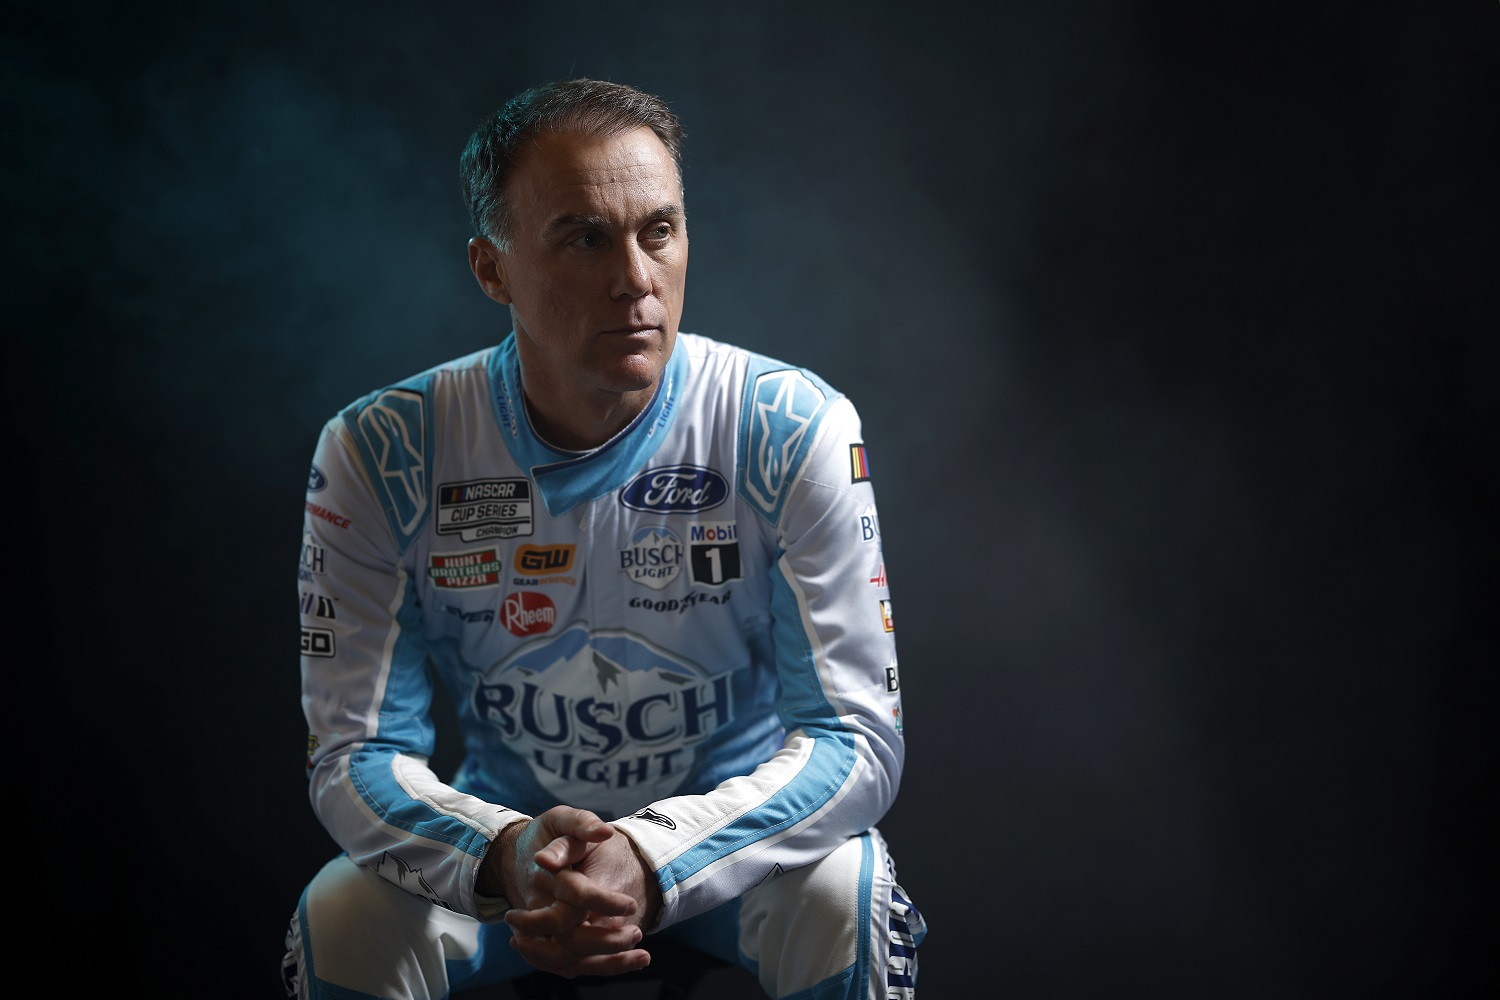 Kevin Harvick poses for a photo during NASCAR Production Days at Charlotte Convention Center on Jan. 17, 2023. | Jared C. Tilton/Getty Images